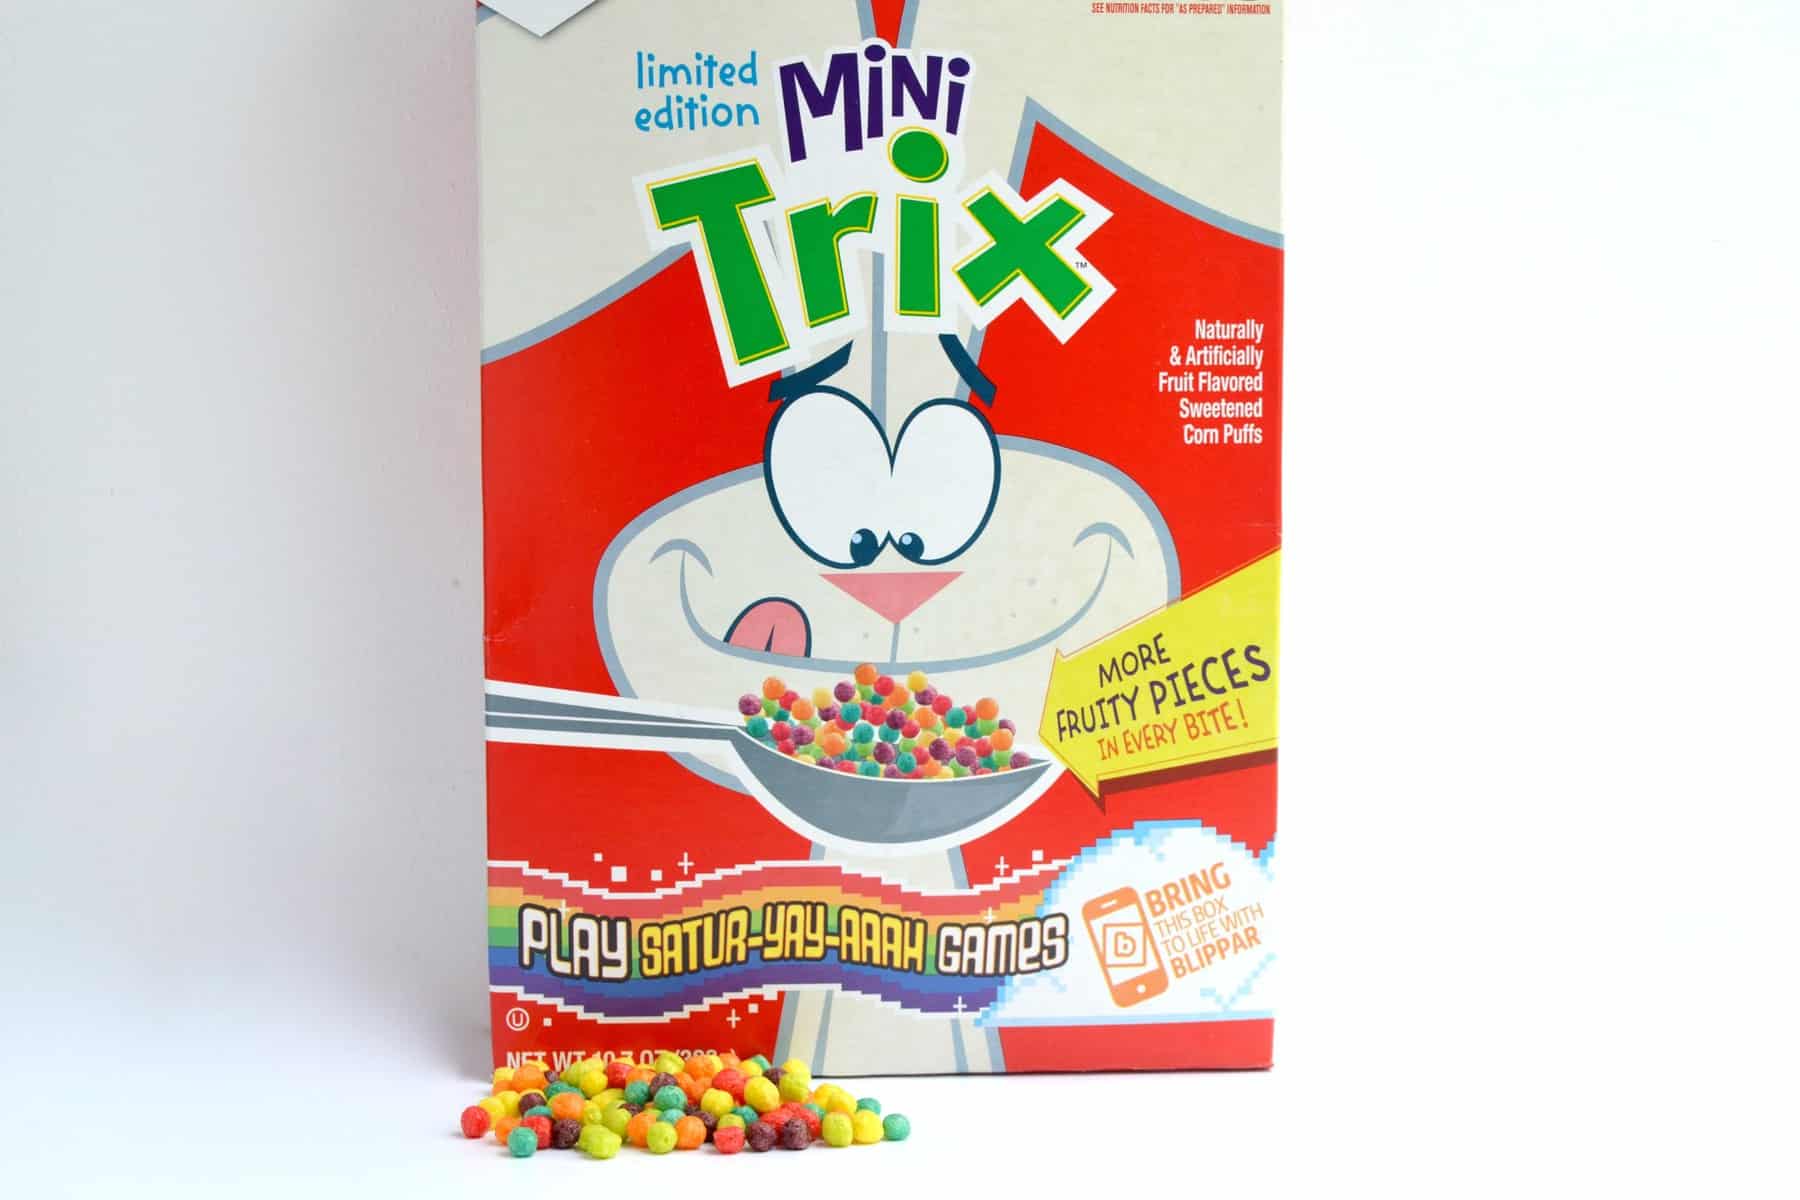 And lastly, the premium item of the month is Limited Edition Mini Trix. 